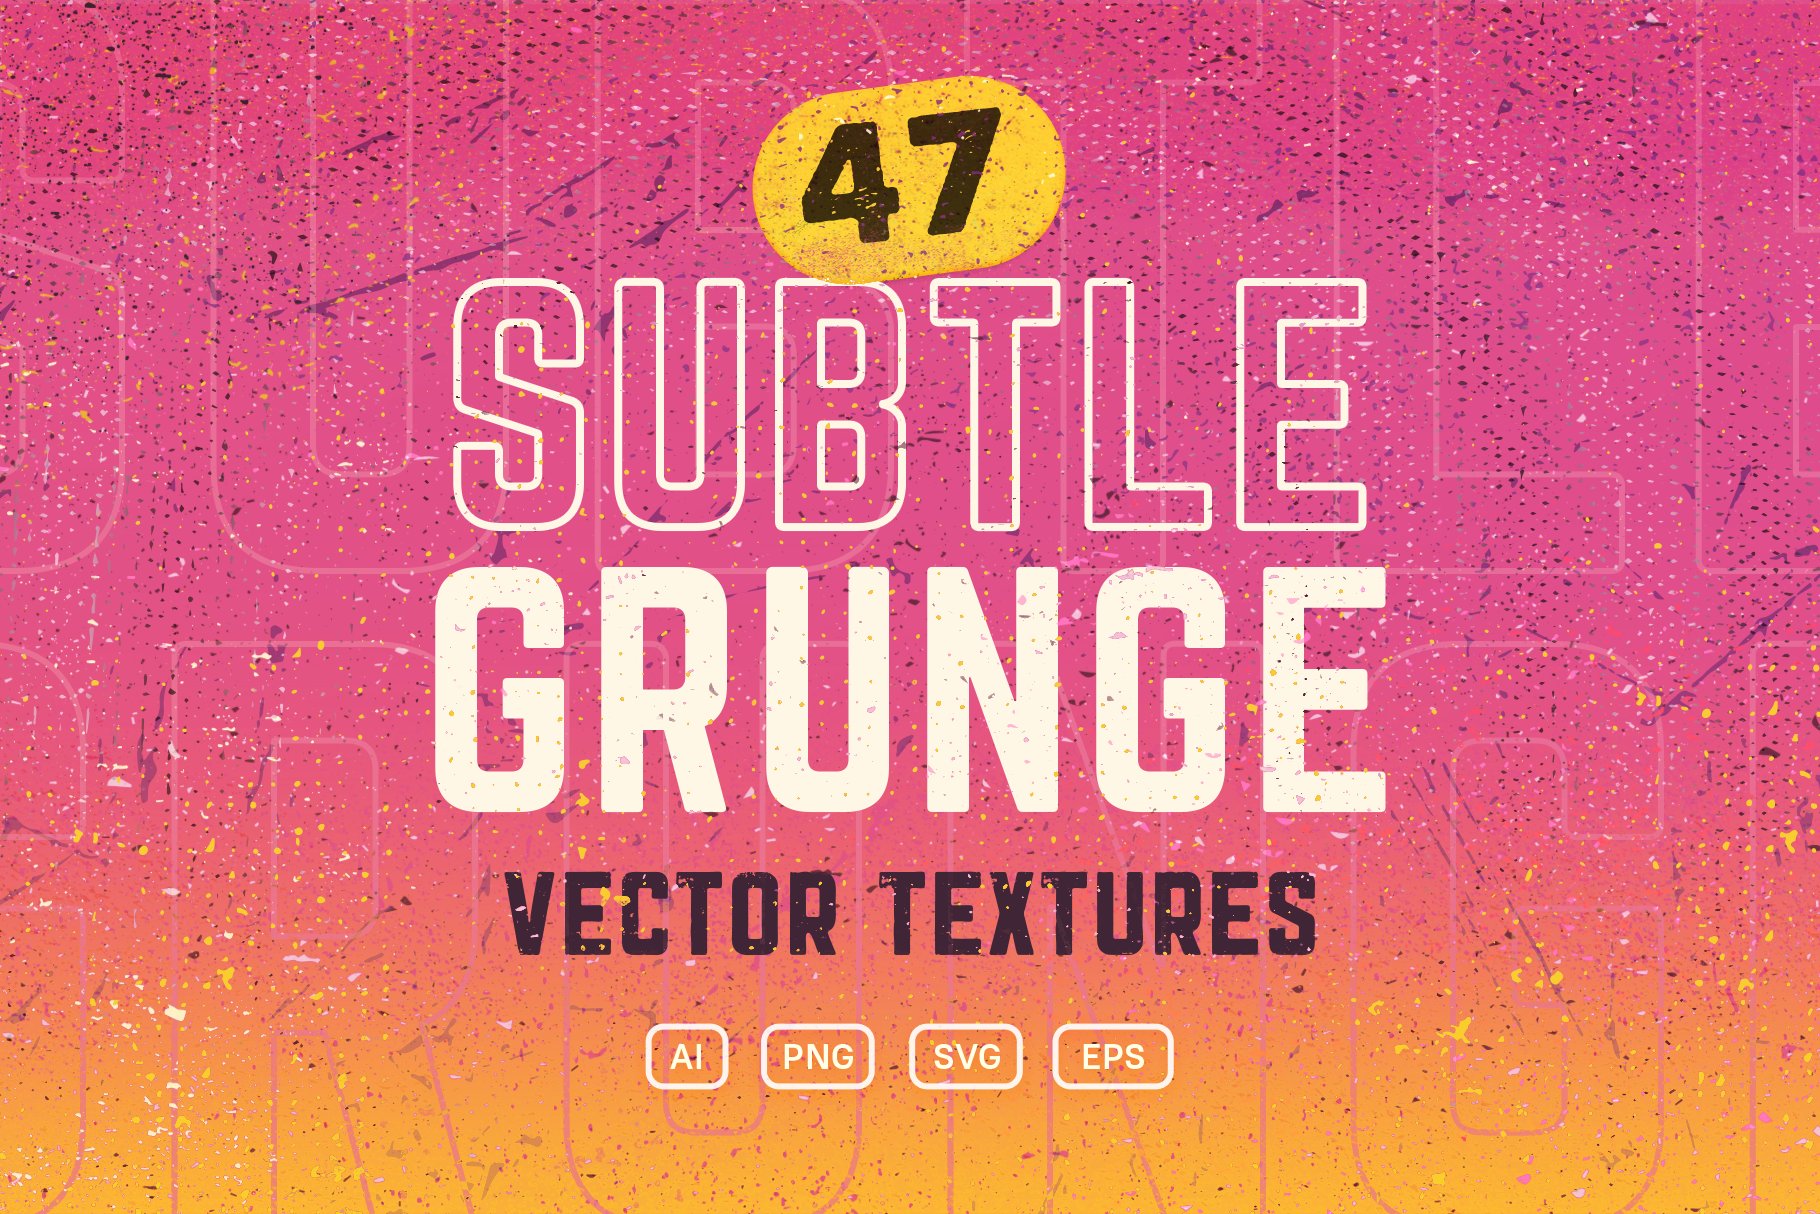 47 Vector Subtle Grunge Textures cover image.